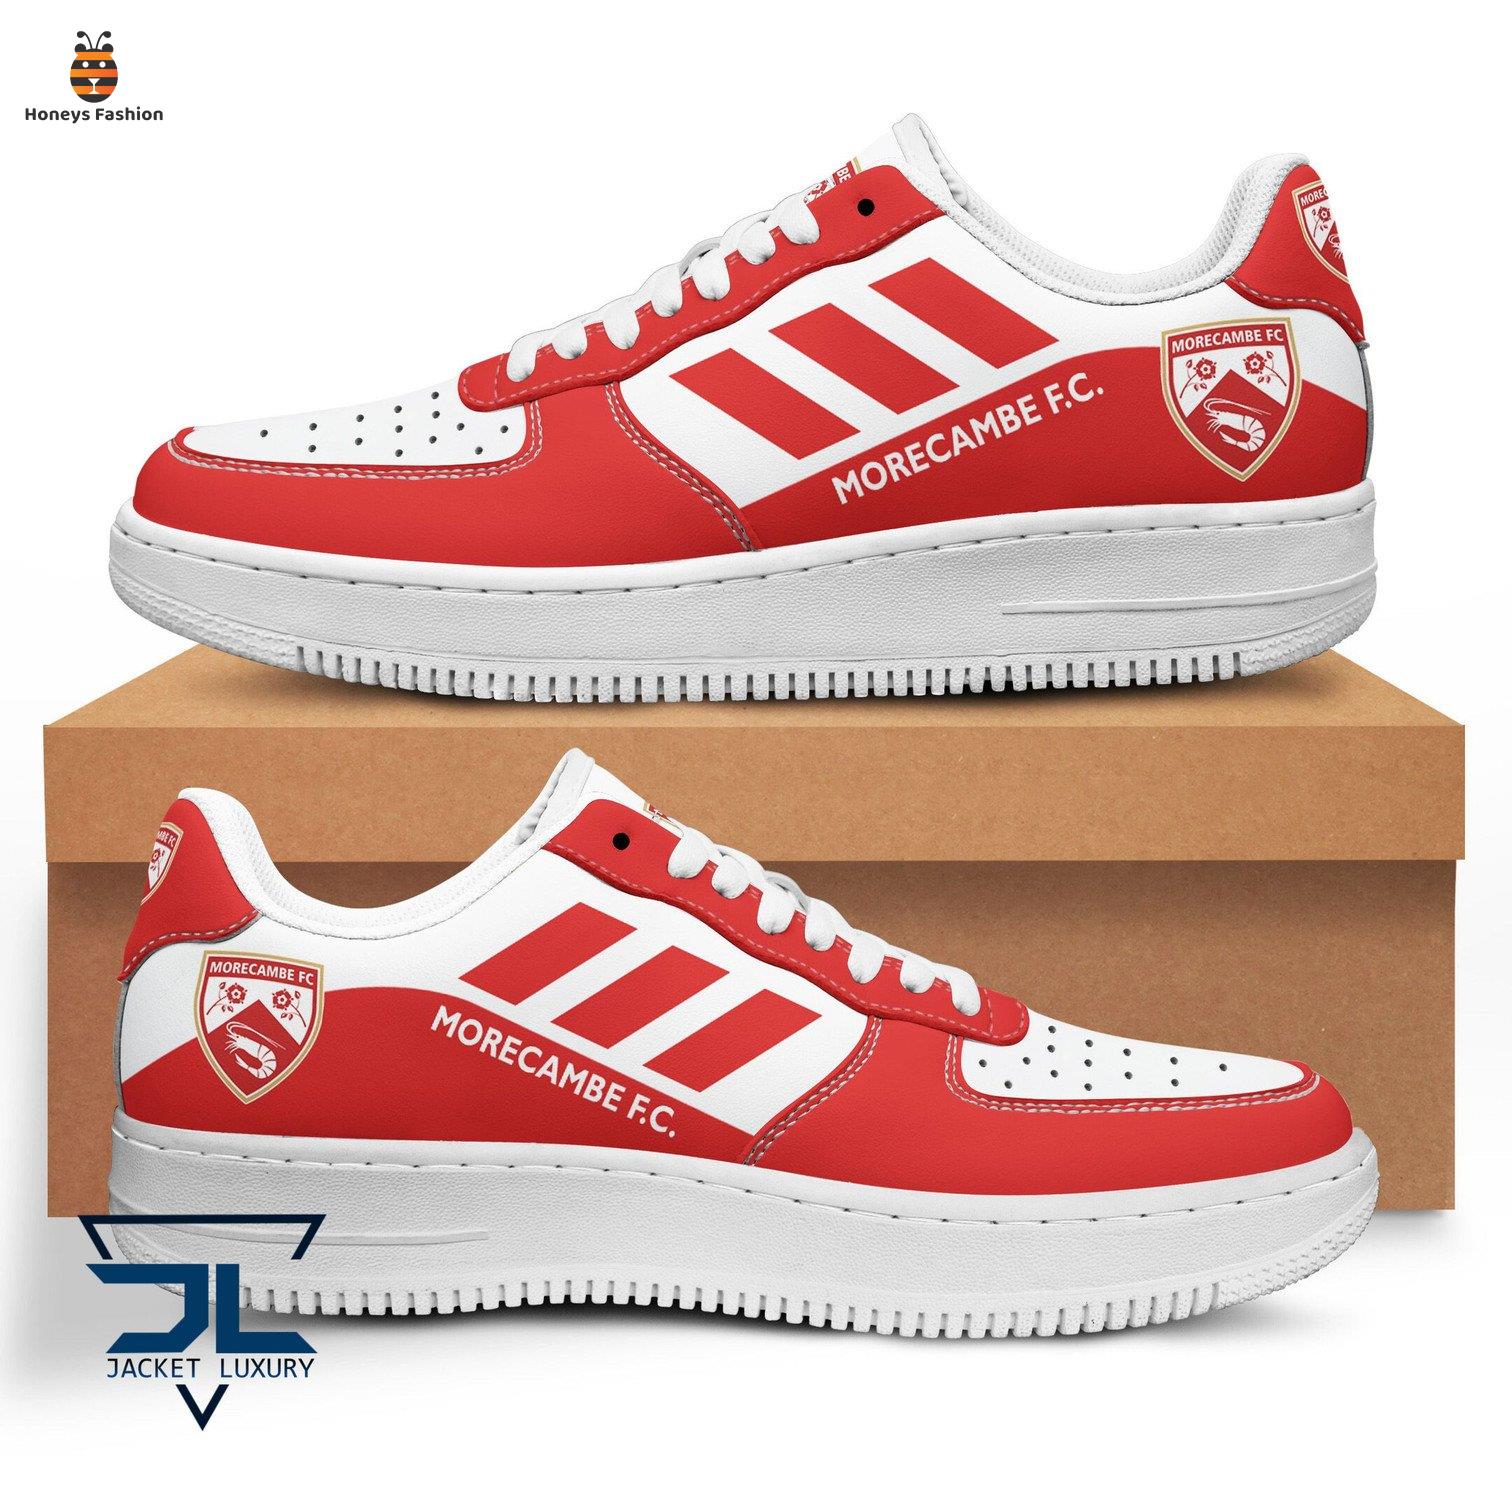 Morecambe F.C air force 1 shoes